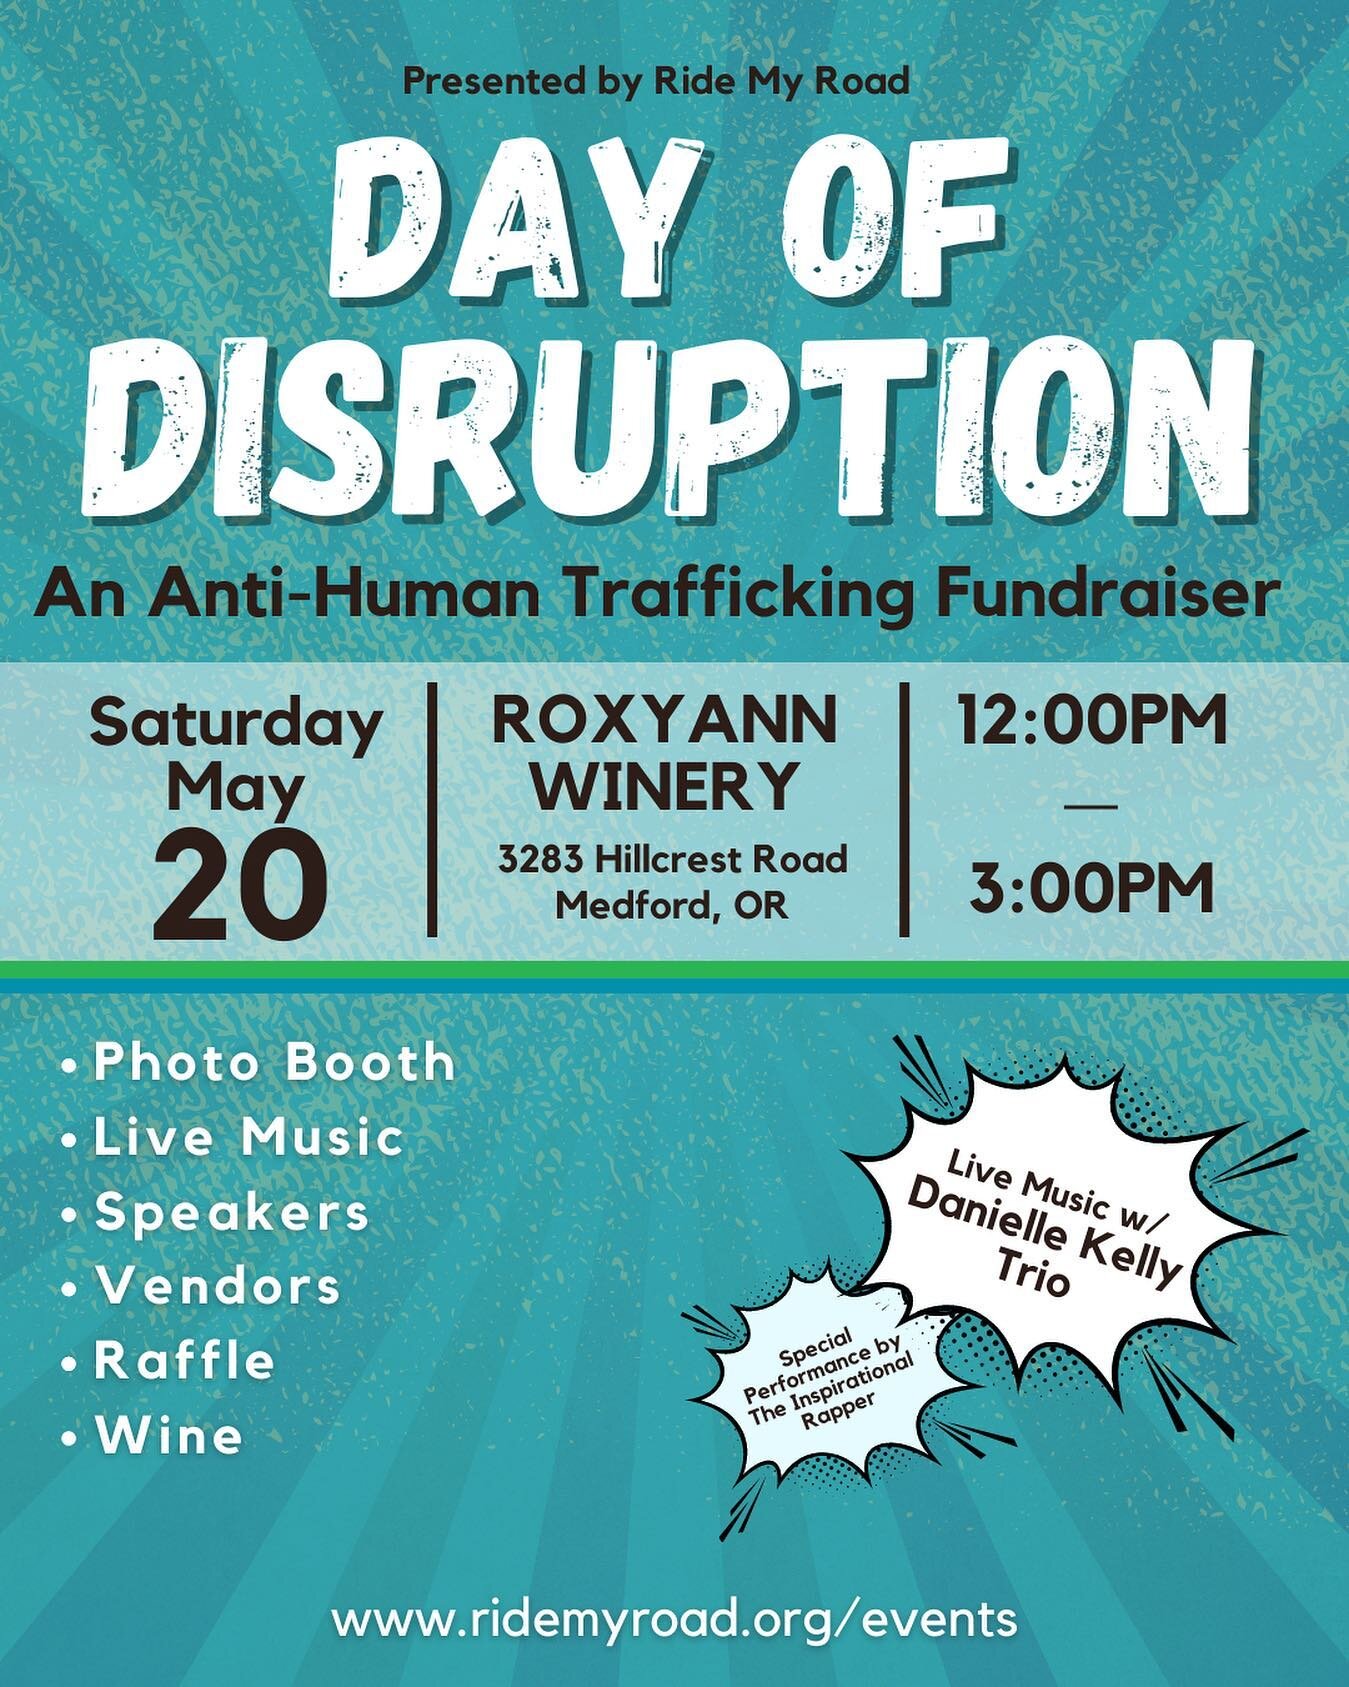 Almost one week away! Day if Disruption at @roxyann_winery! Music by @daniellekellymusic and special performance by @theinspirationalrapper! Raffle, speakers, Photo Booth! Lots of fun! 
Link in bio to register!